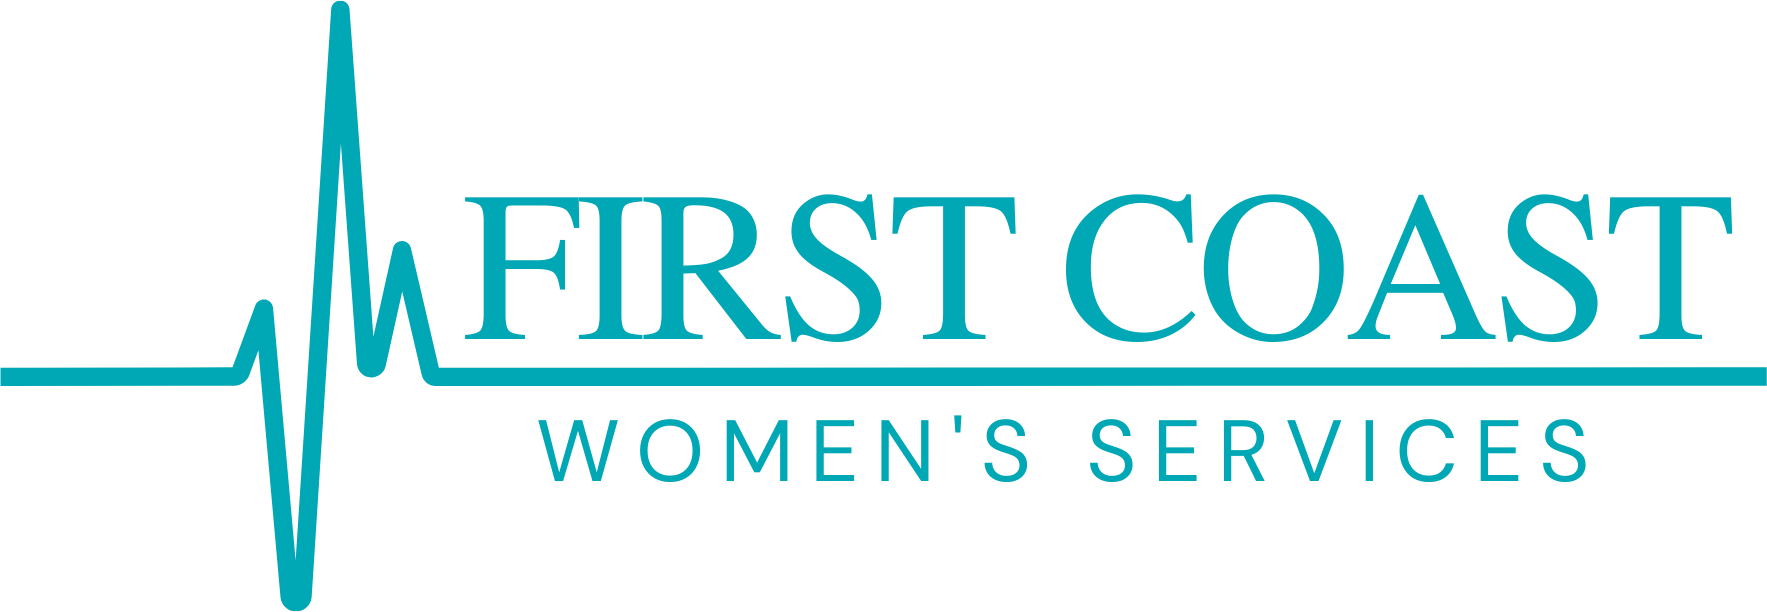 Image for First Coast Women's Services